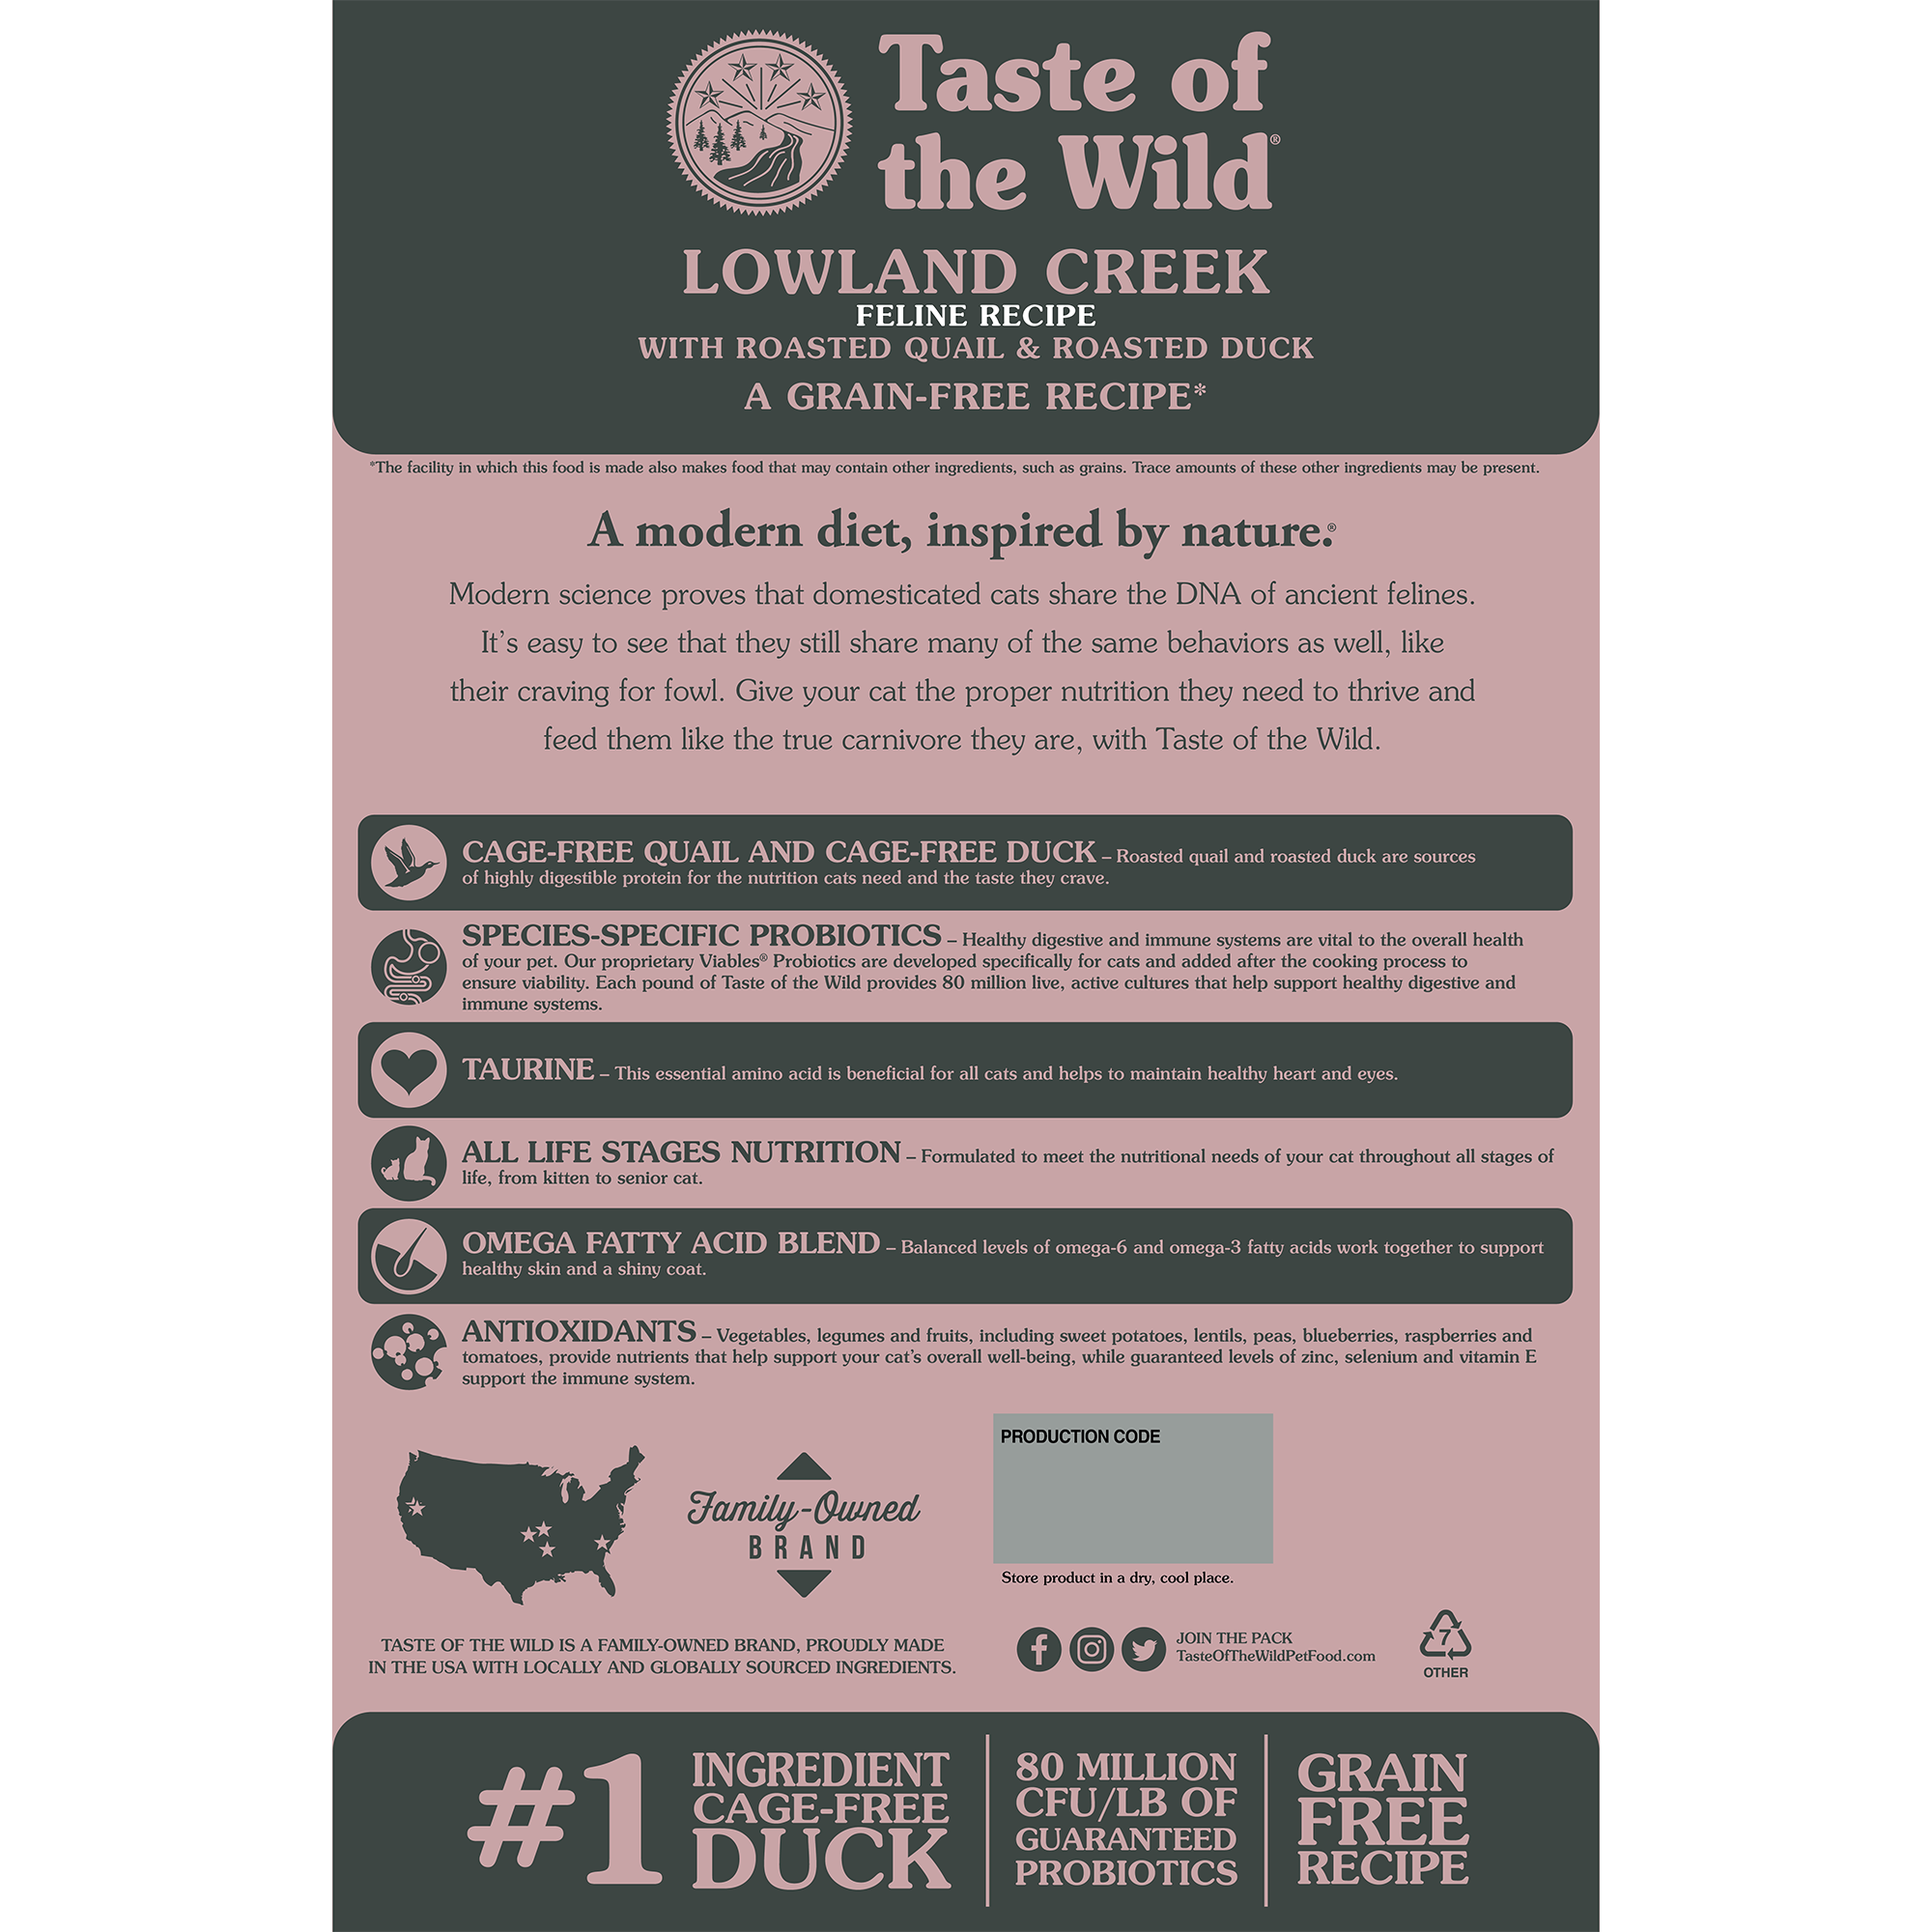 The back of a bag of Lowland Creek Feline Recipe with Roasted Quail & Roasted Duck.